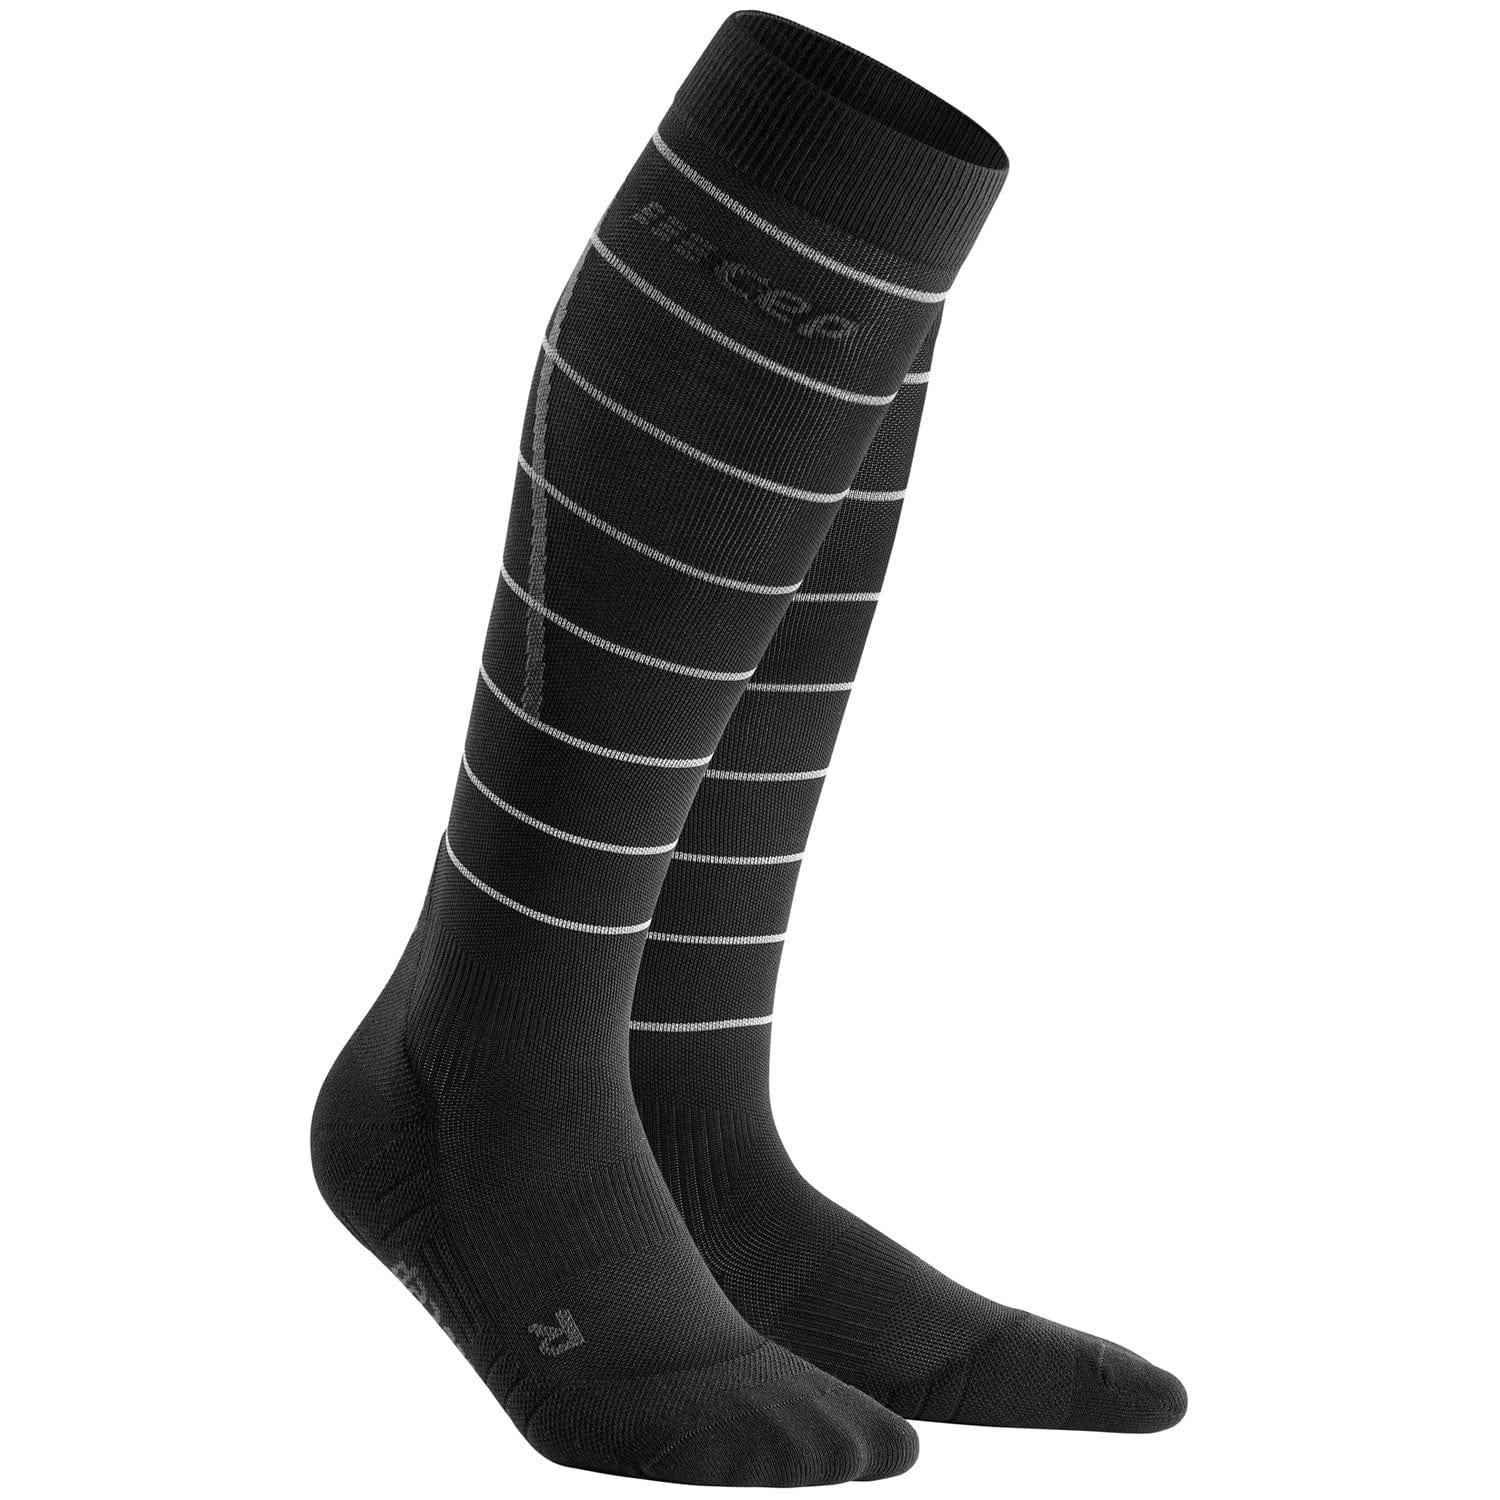 CEP I Be active, be reflective - Reflective Compression Socks 